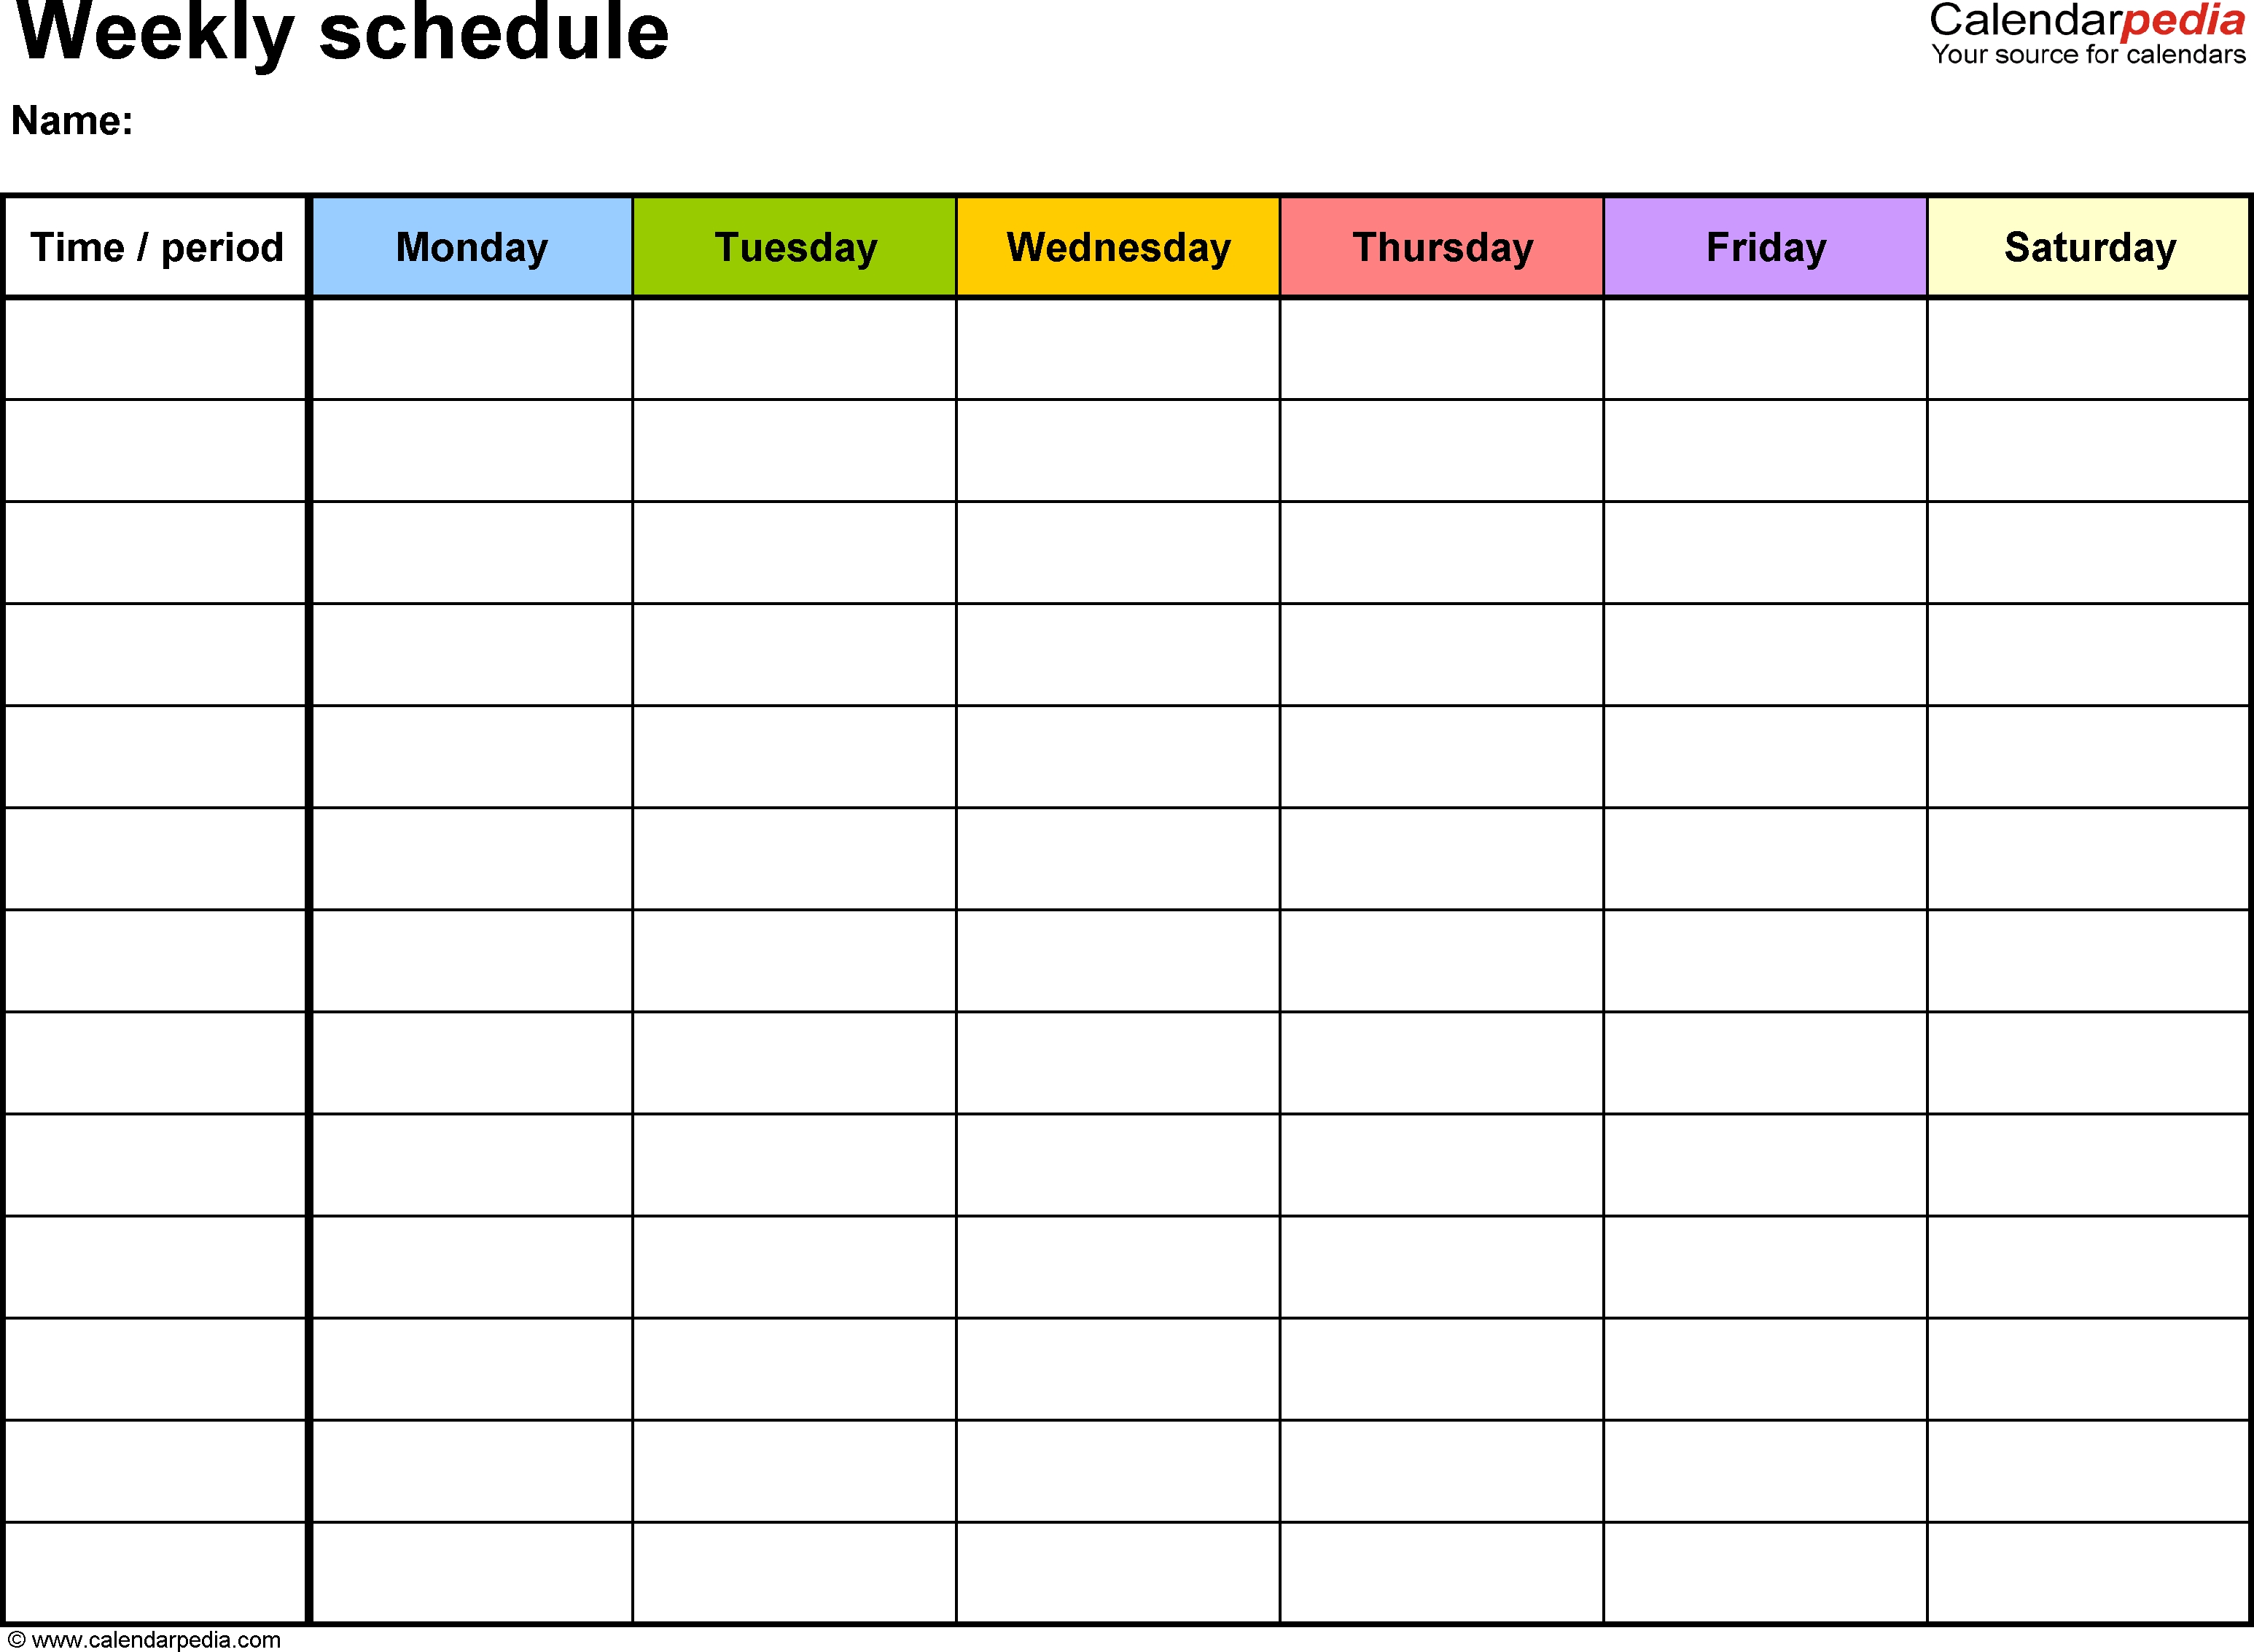 Free Weekly Schedule Templates For Word - 18 Templates within Printable Fill In Lifting Scedual